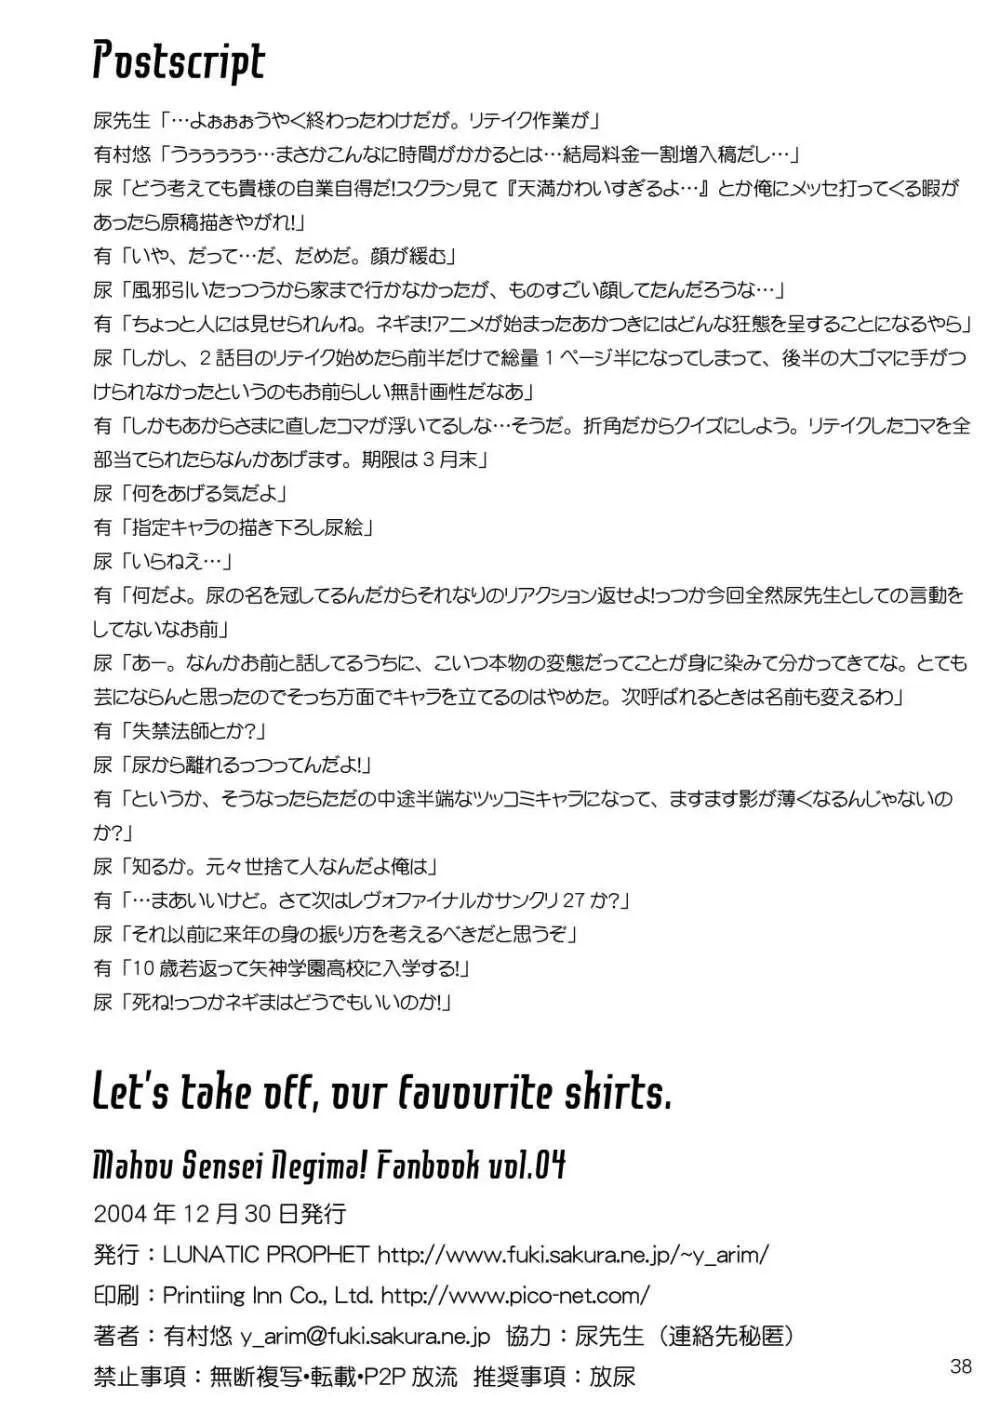 Let’s take off, our favourite skirts 38ページ